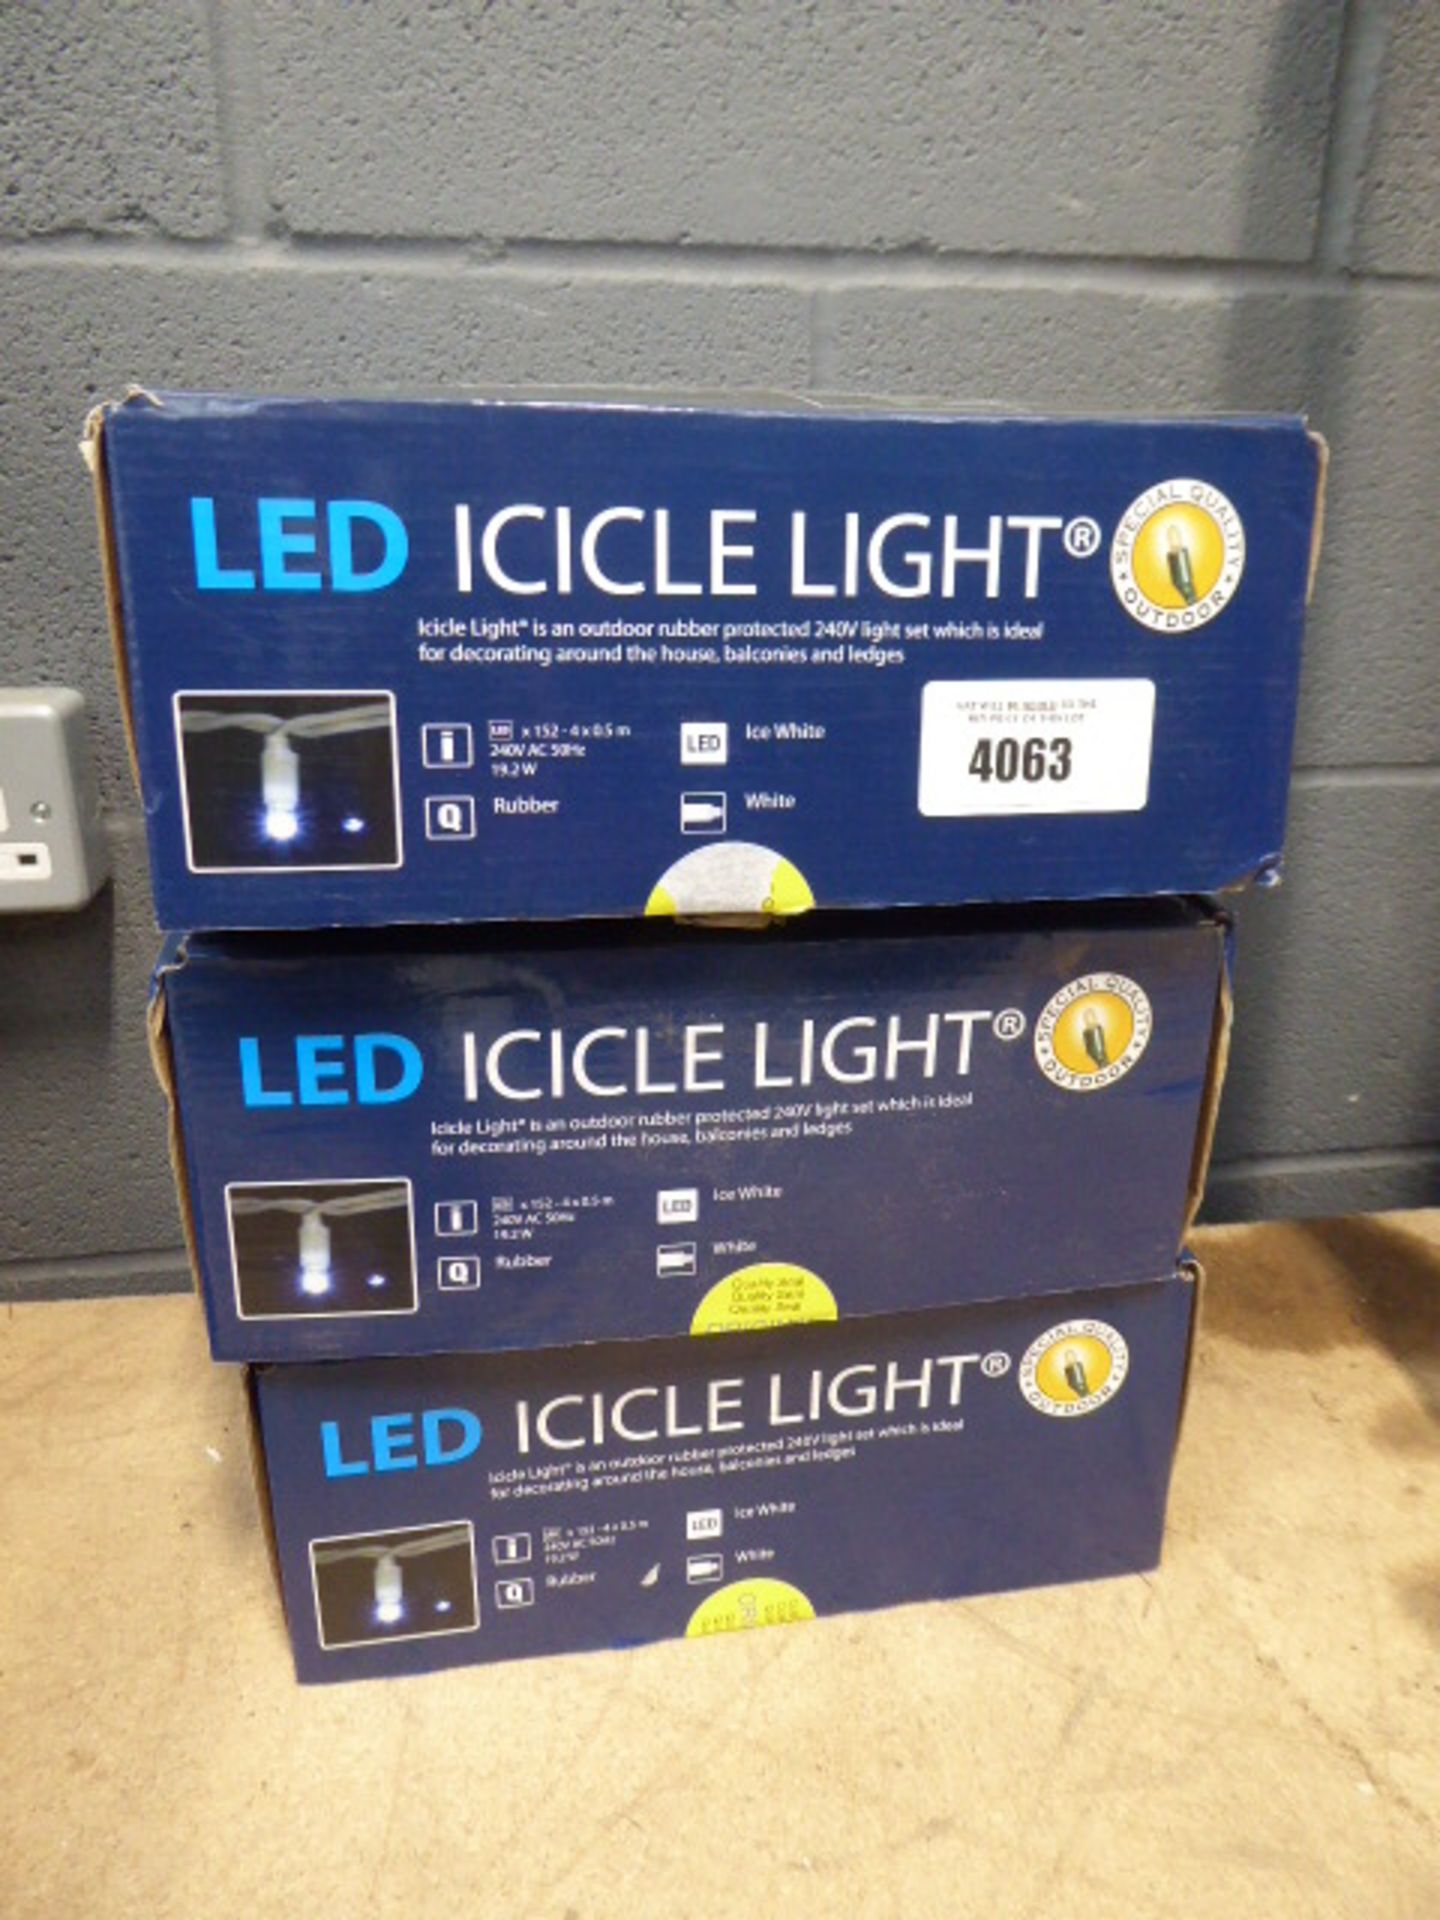 3 boxes of LED icicle lights